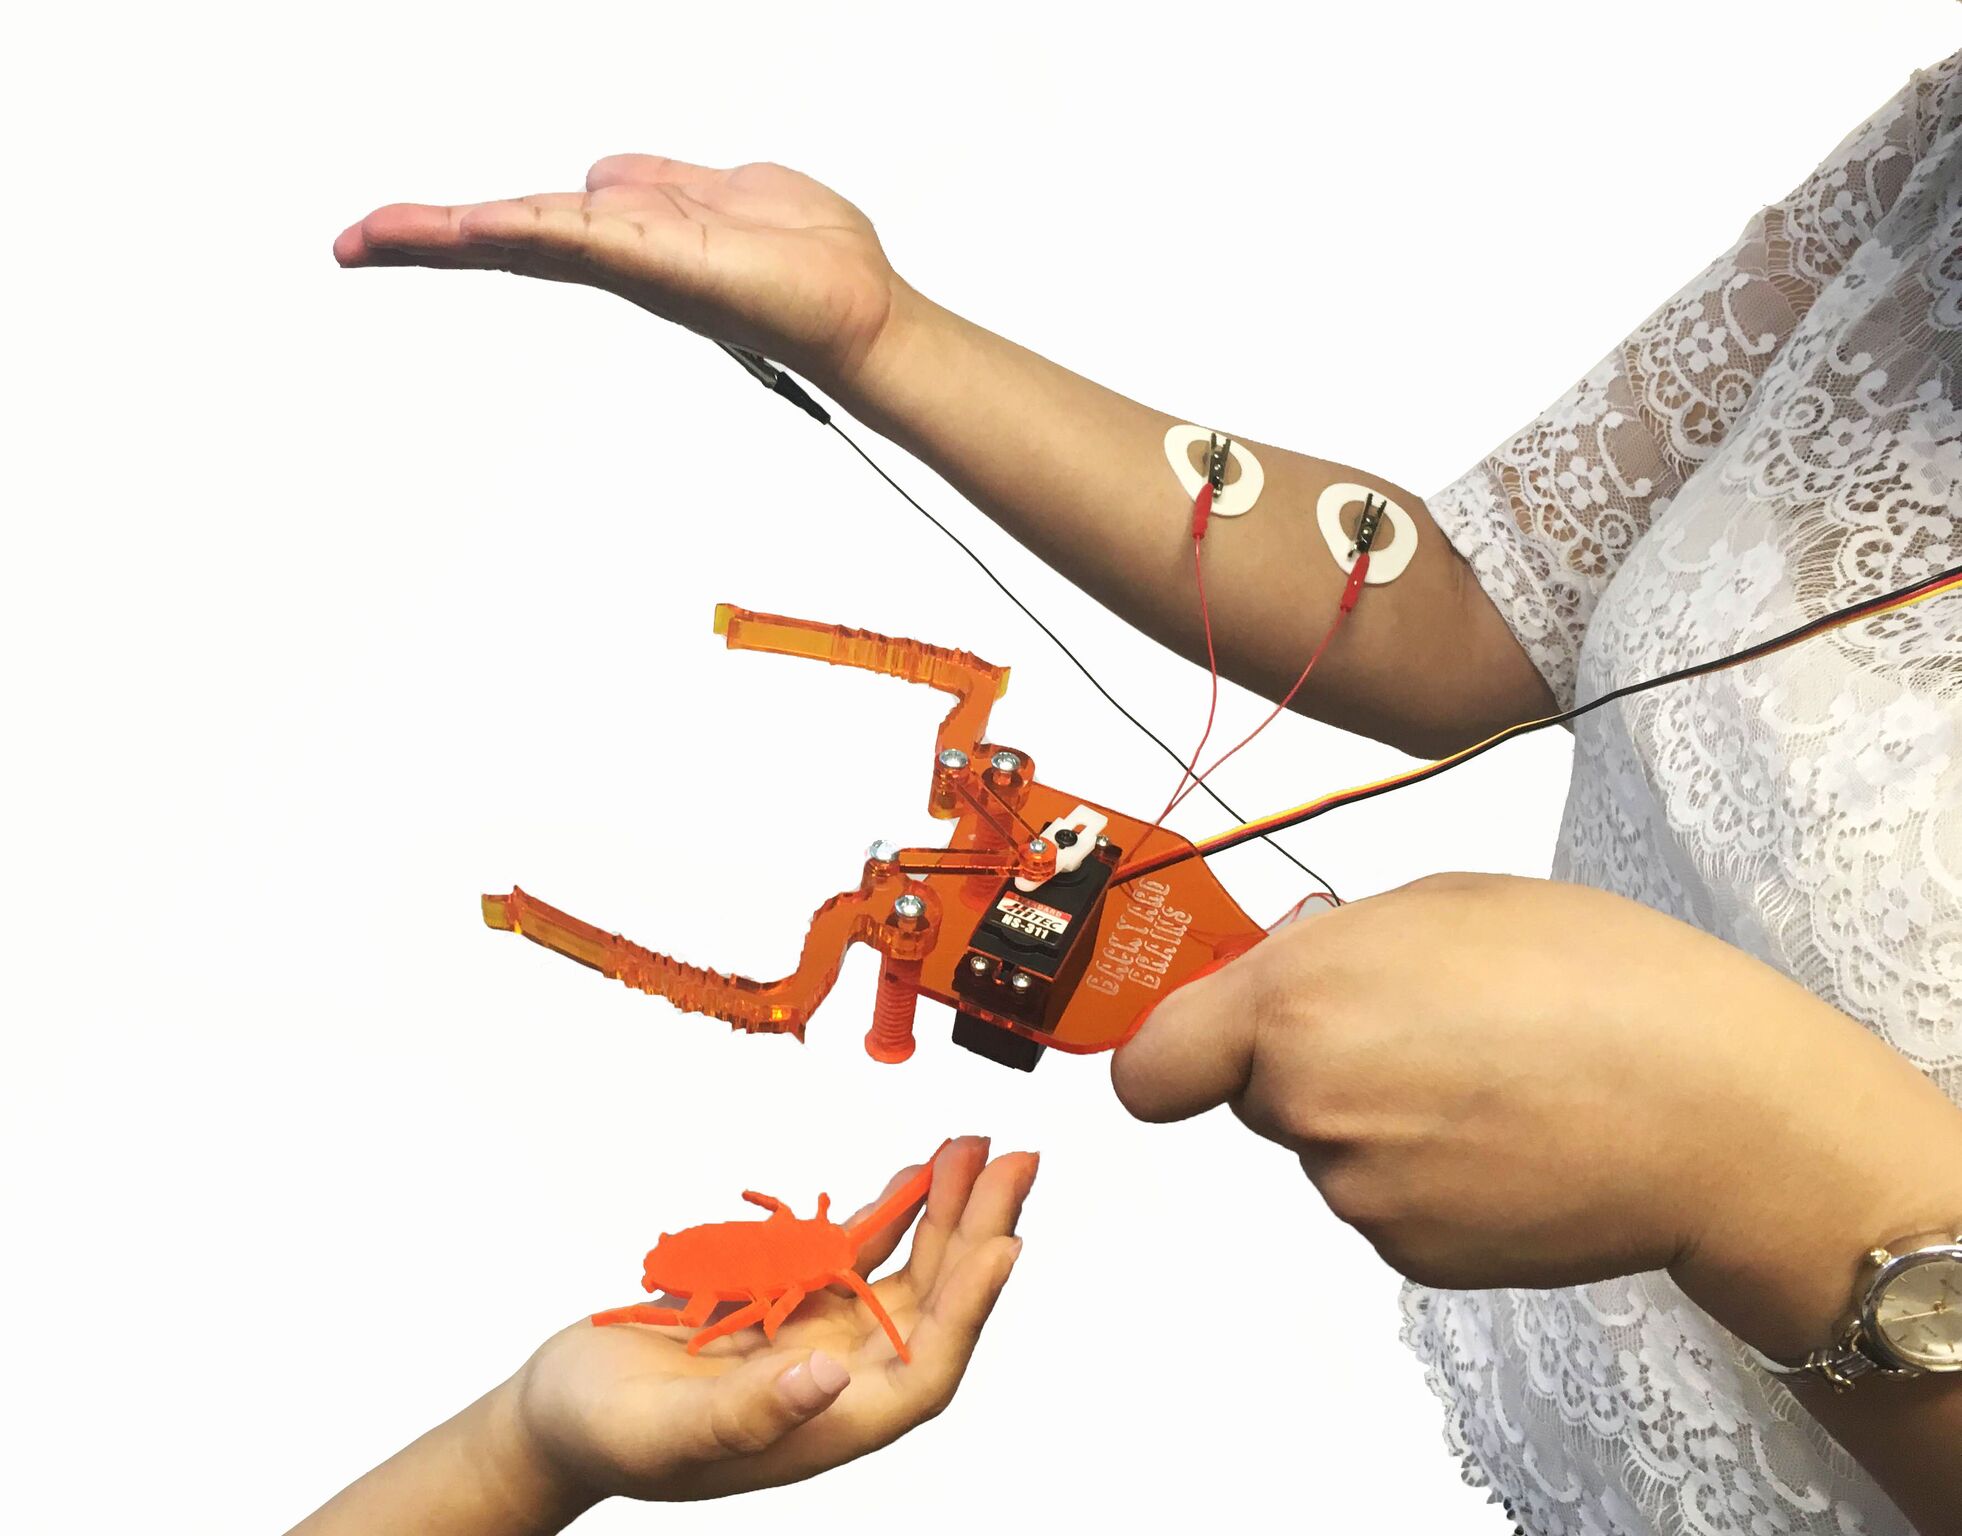 The laser cut acrylic frame and motorized gripping “claw” looks like a pair of cockroach legs.